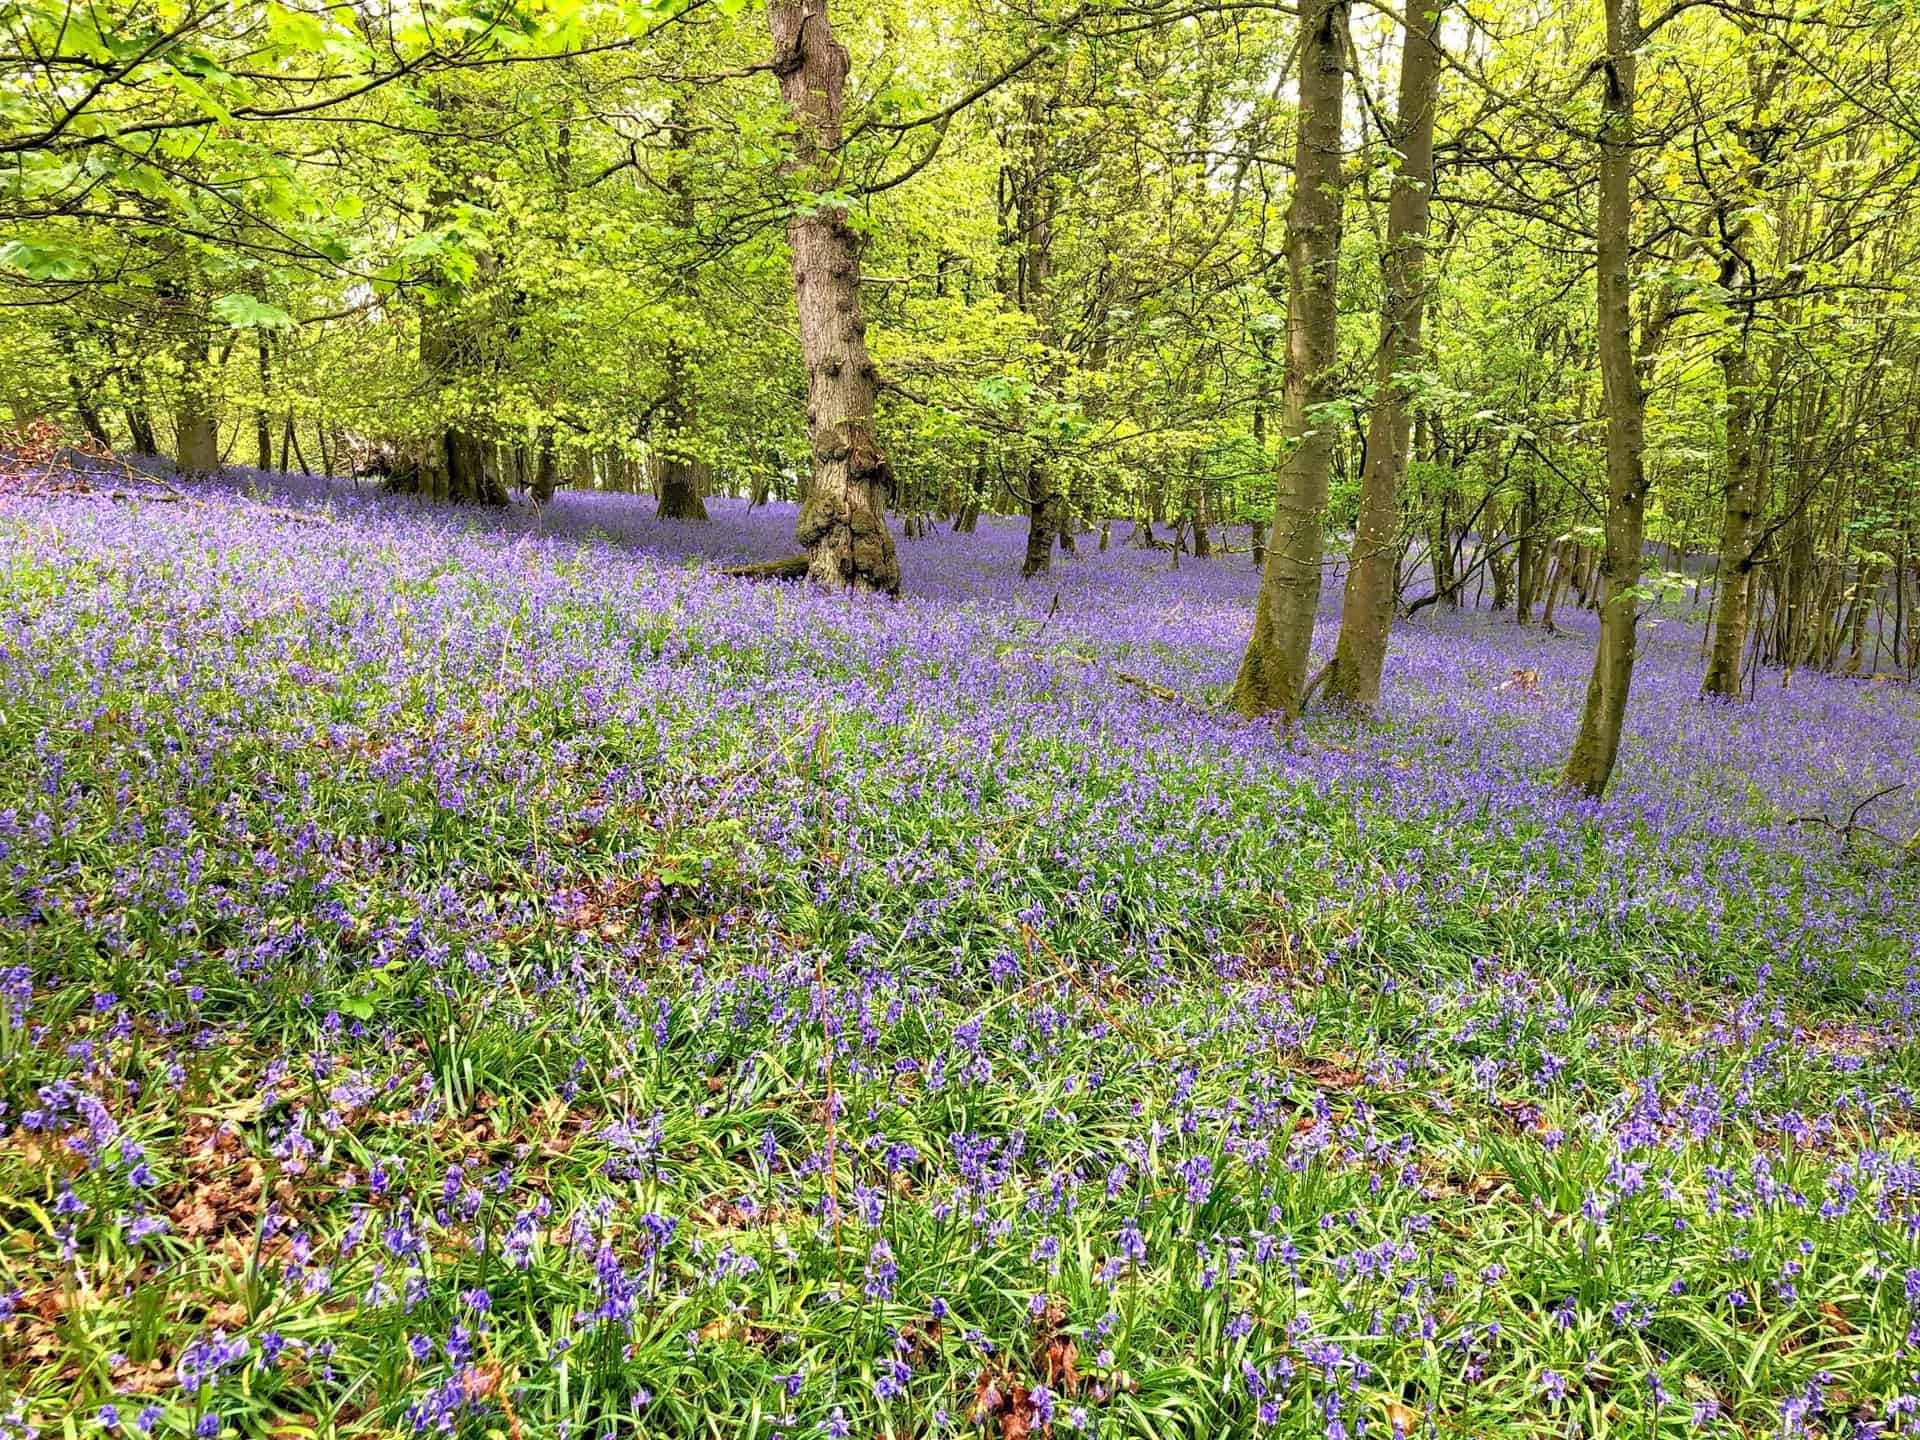 A mystical purple blanket of flowering bluebells in Flakebridge Wood is a seasonal highlight that adds a touch of magic to North Pennines walks in the springtime.